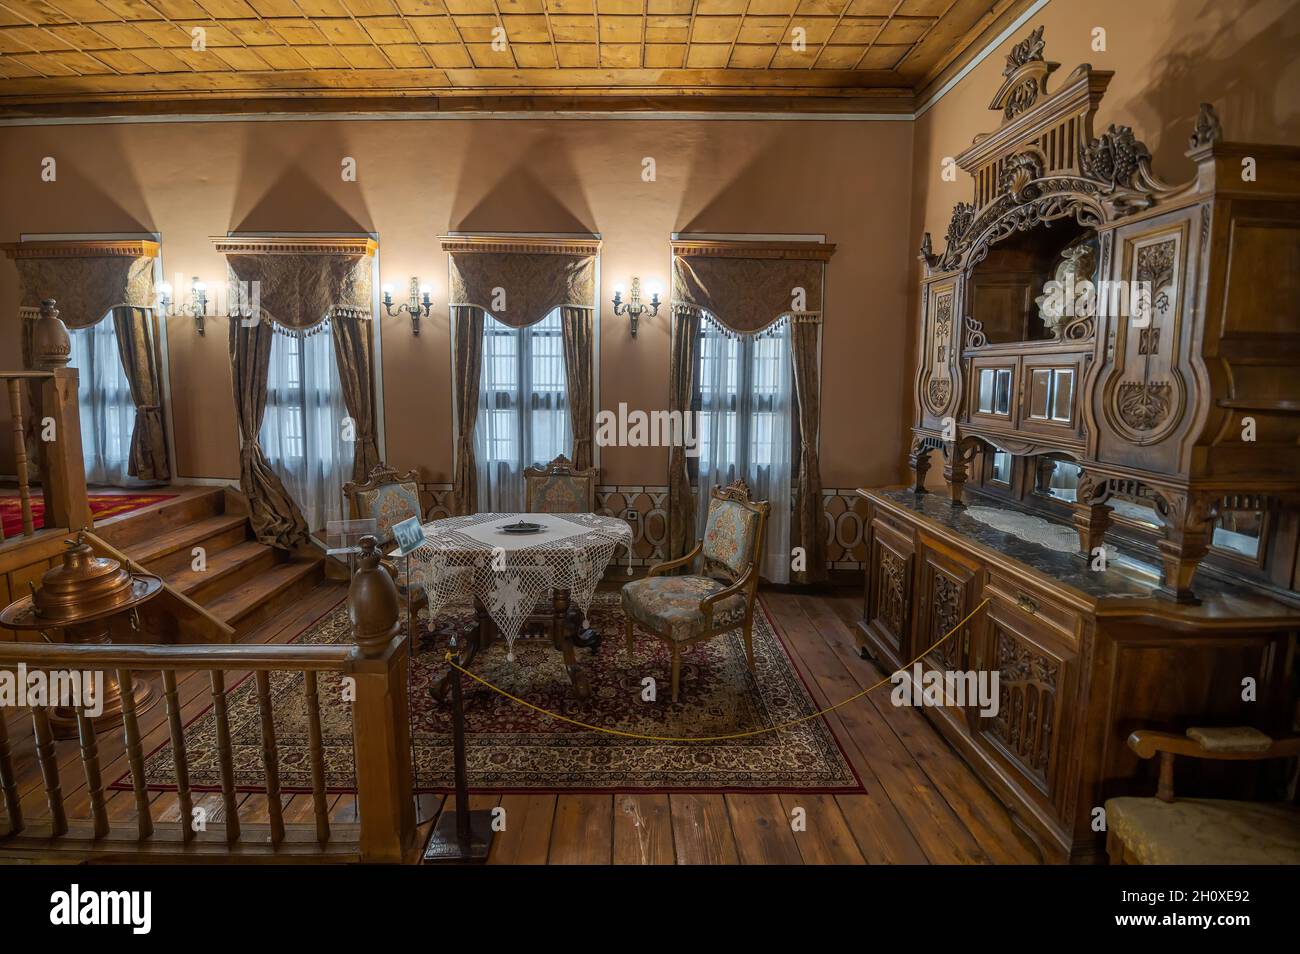 Plovdiv, Bulgaria. Interior of Balabanov House. One of the most beautiful old Bulgarian houses. Stock Photo